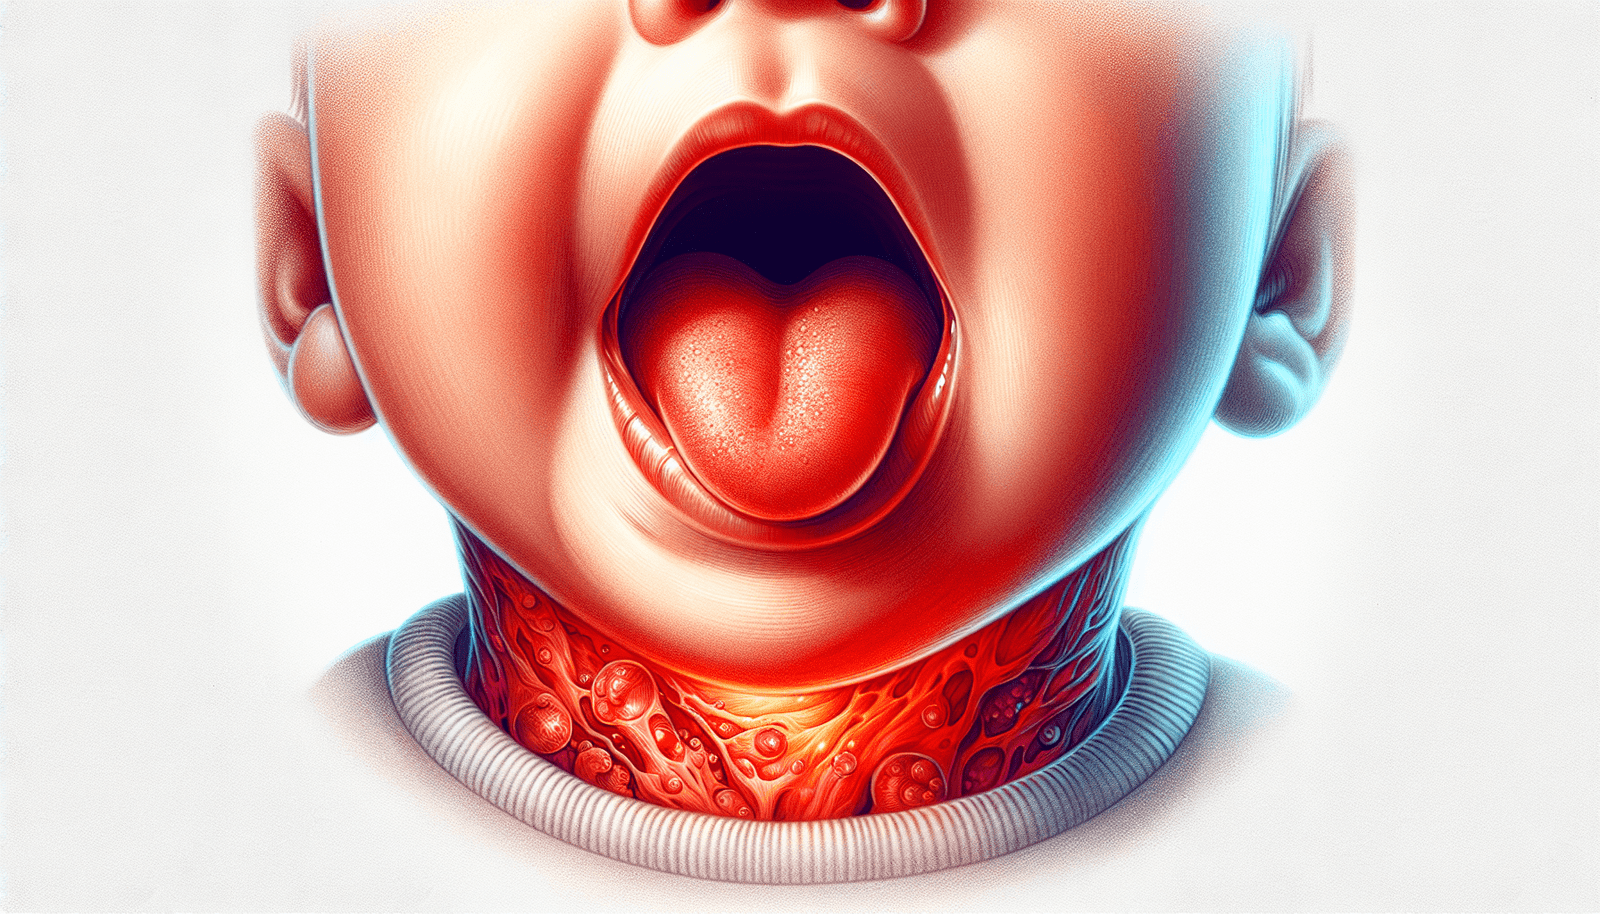 Signs Your Baby Has a Sore or Red Throat and What To Do